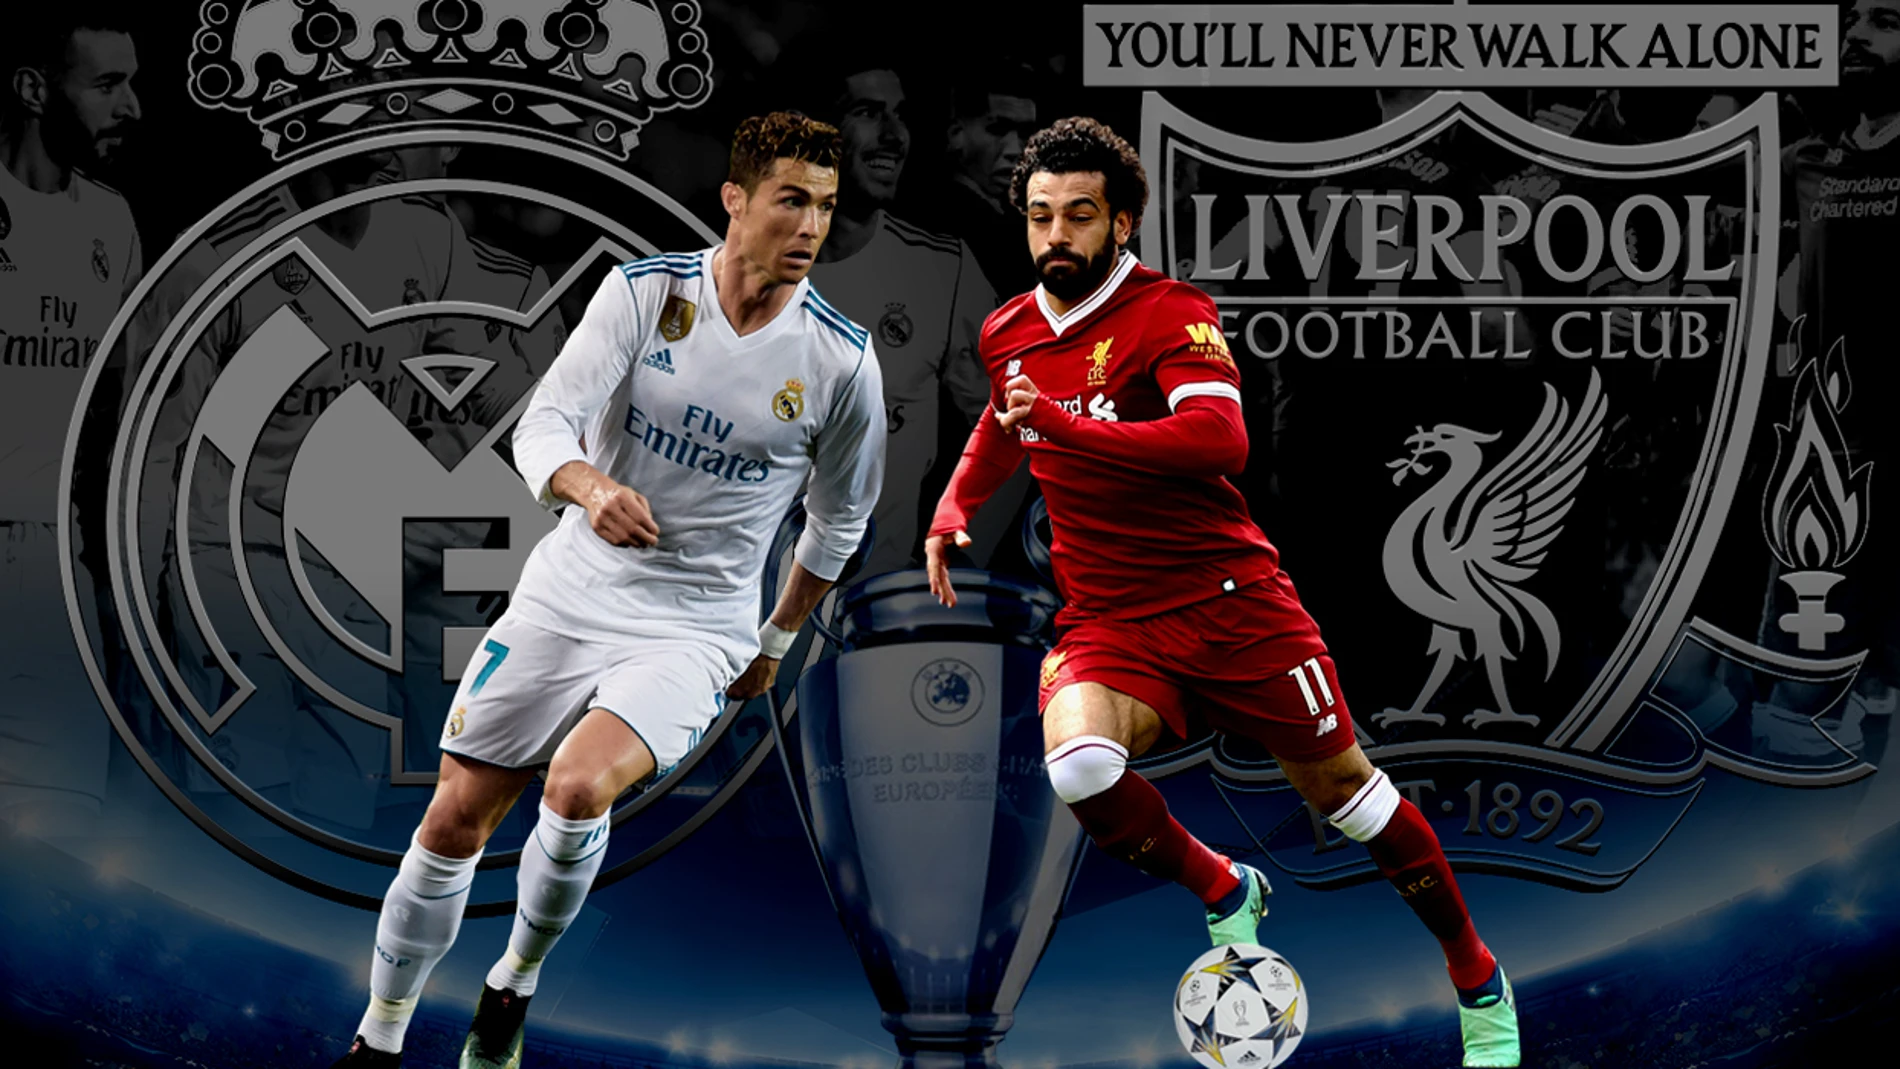 Real Madrid - Liverpool, Final Champions League 2018